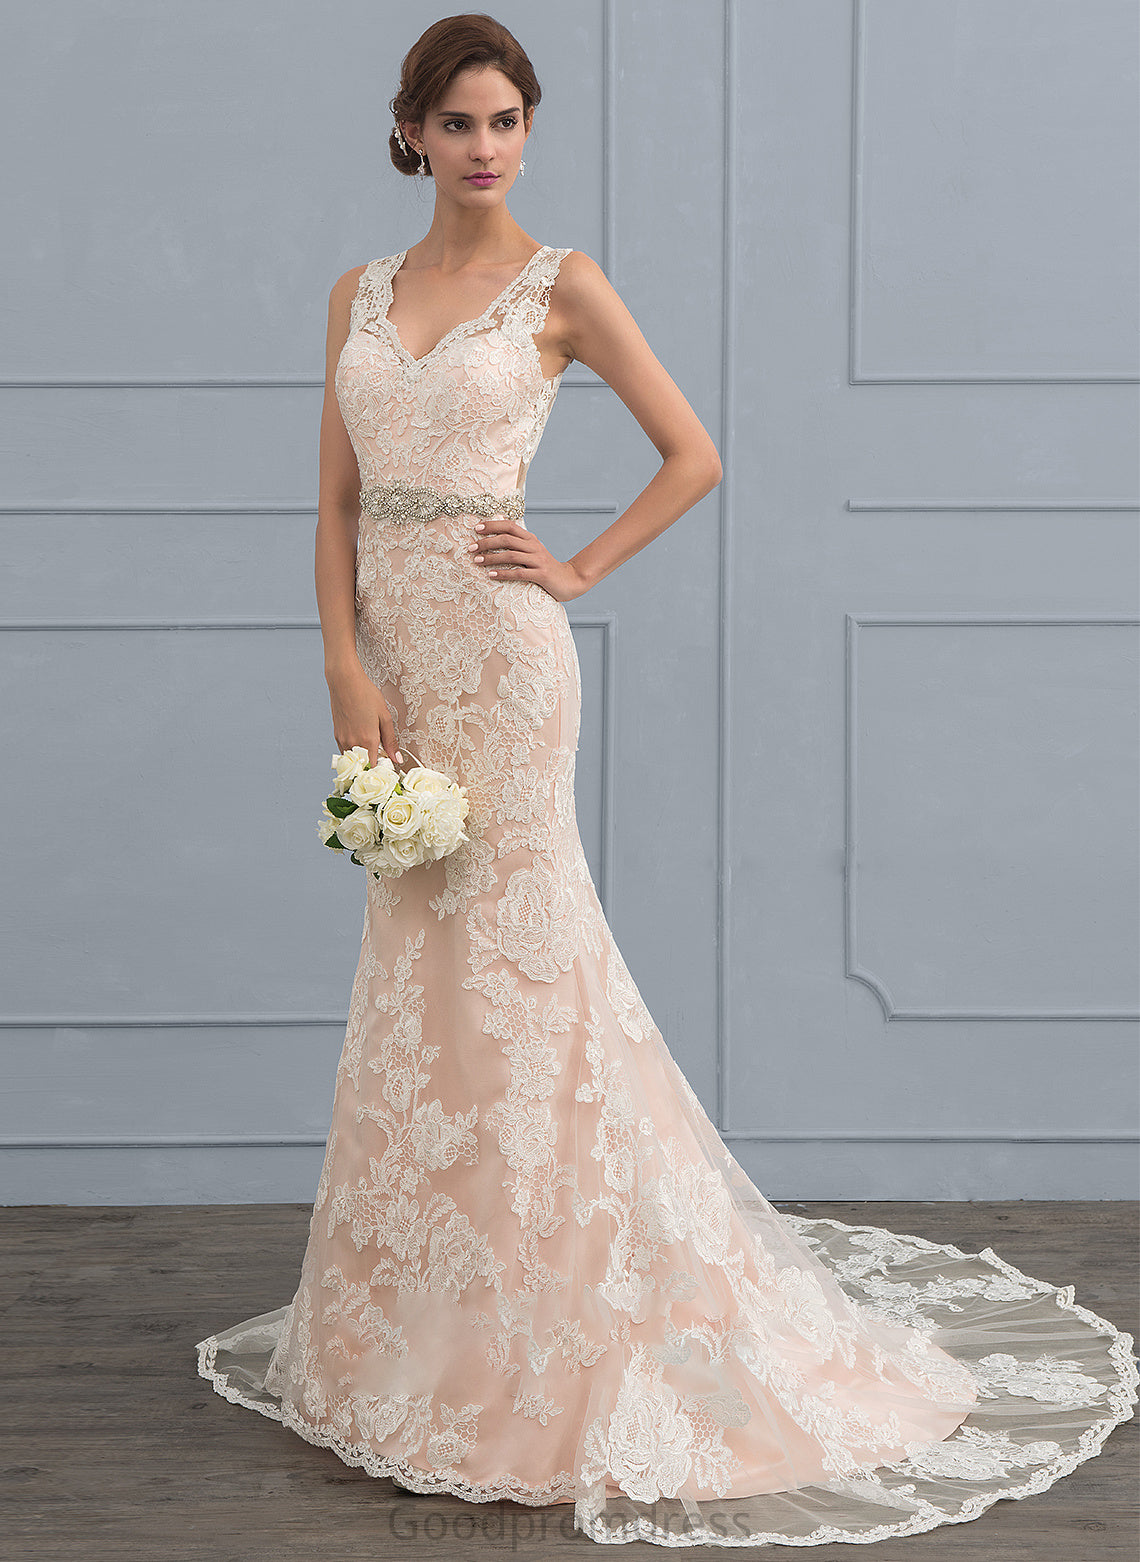 Lace Beading Dress Gill With Wedding Chapel Wedding Dresses V-neck Train Trumpet/Mermaid Tulle